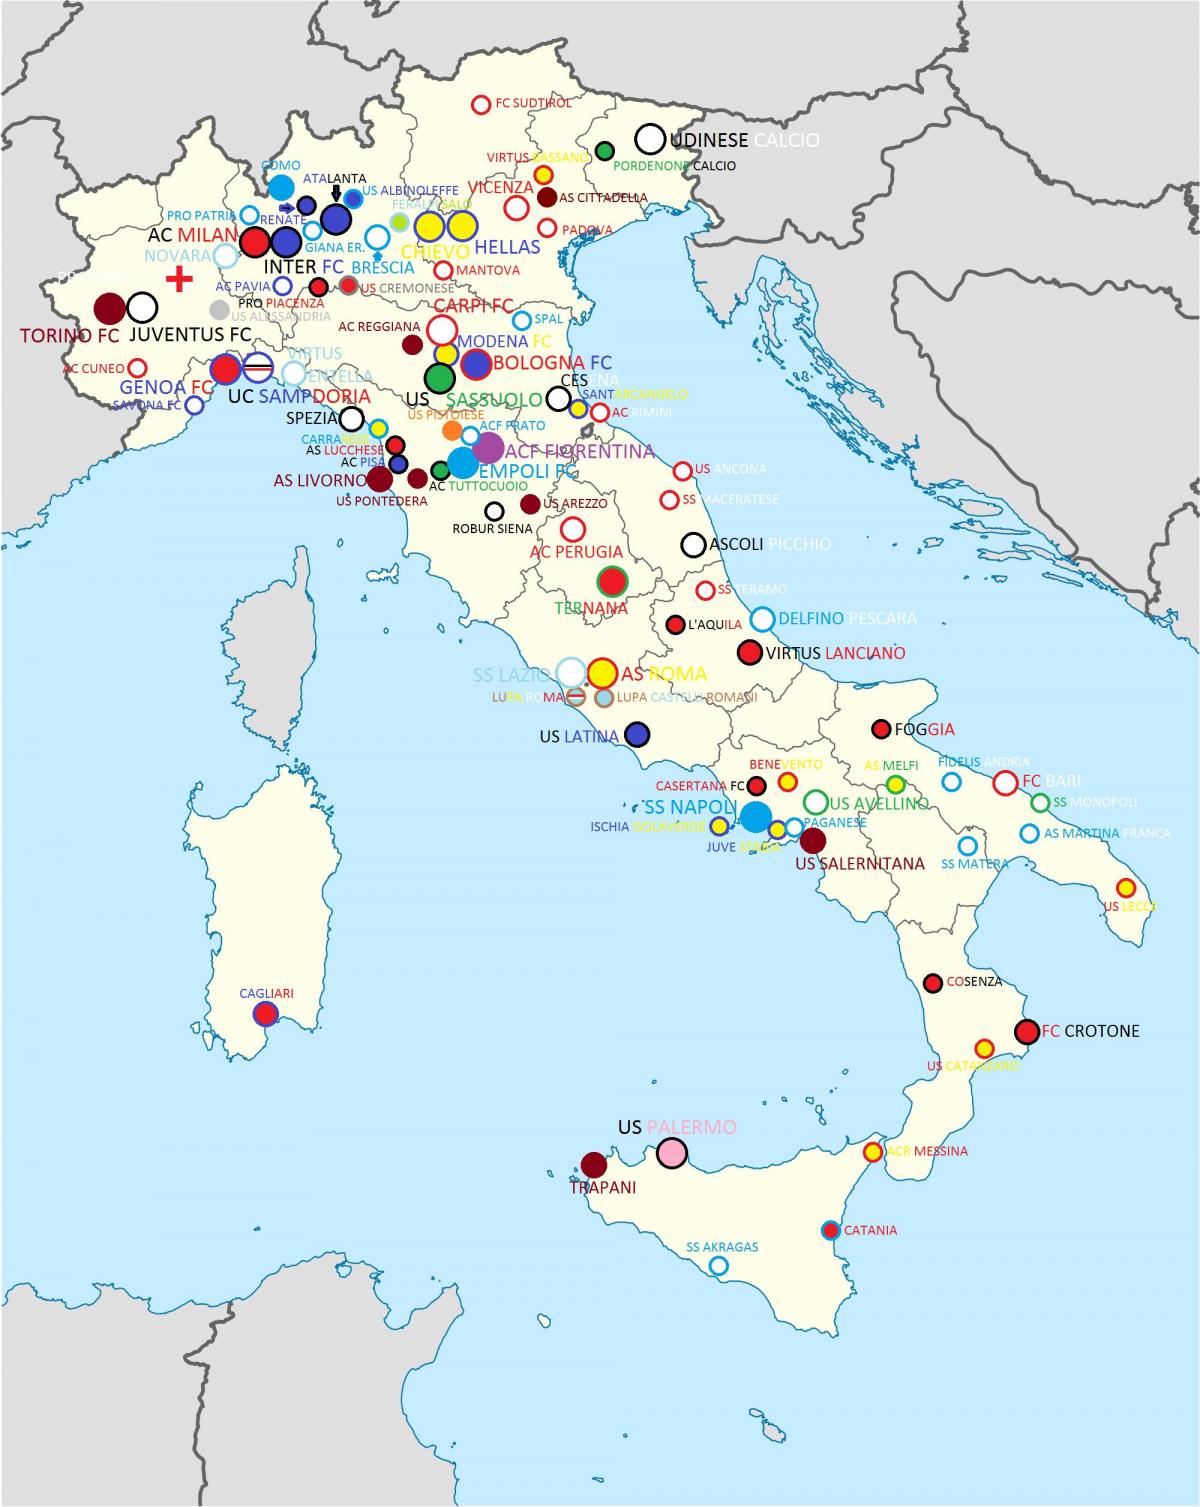 stadiums map of Italy